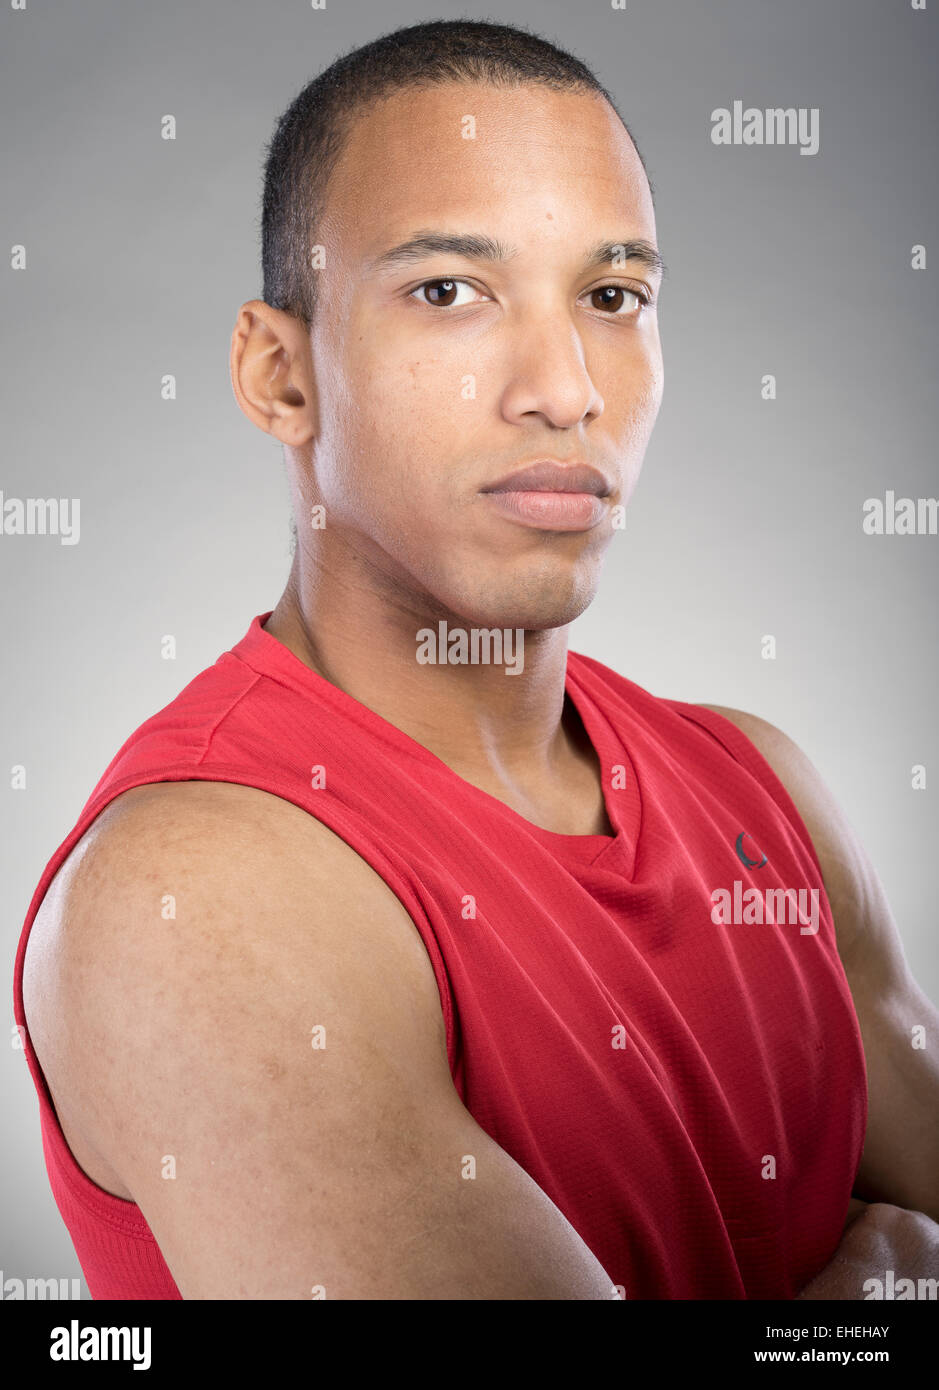 Muscular man wearing red tank top vest Stock Photo